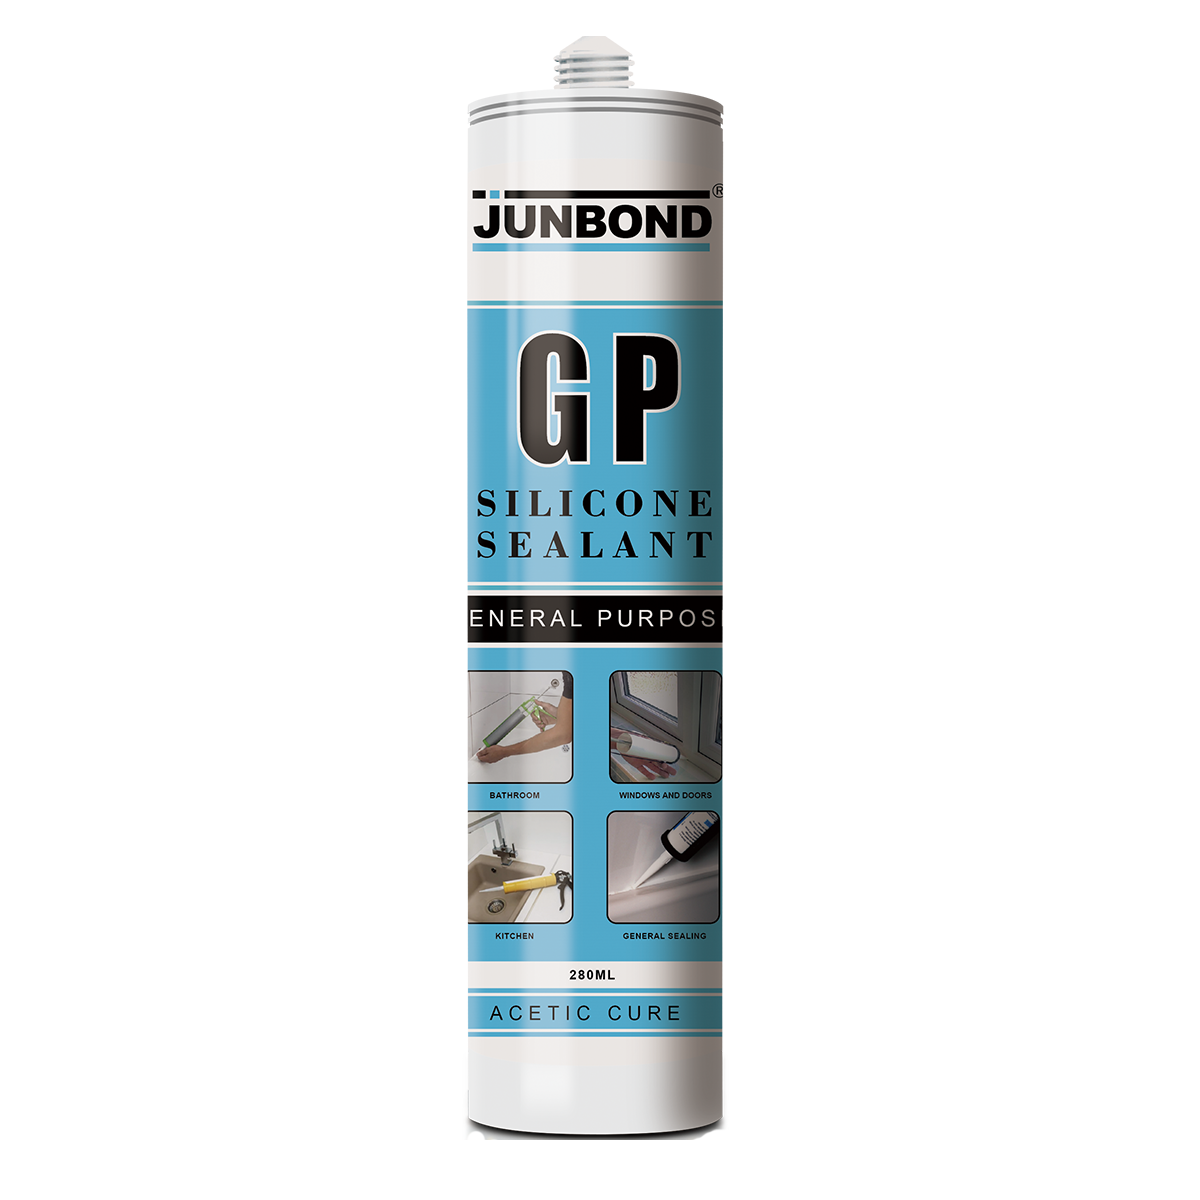 One Component General Purpose Fast Cured Acidic Silicone Sealant